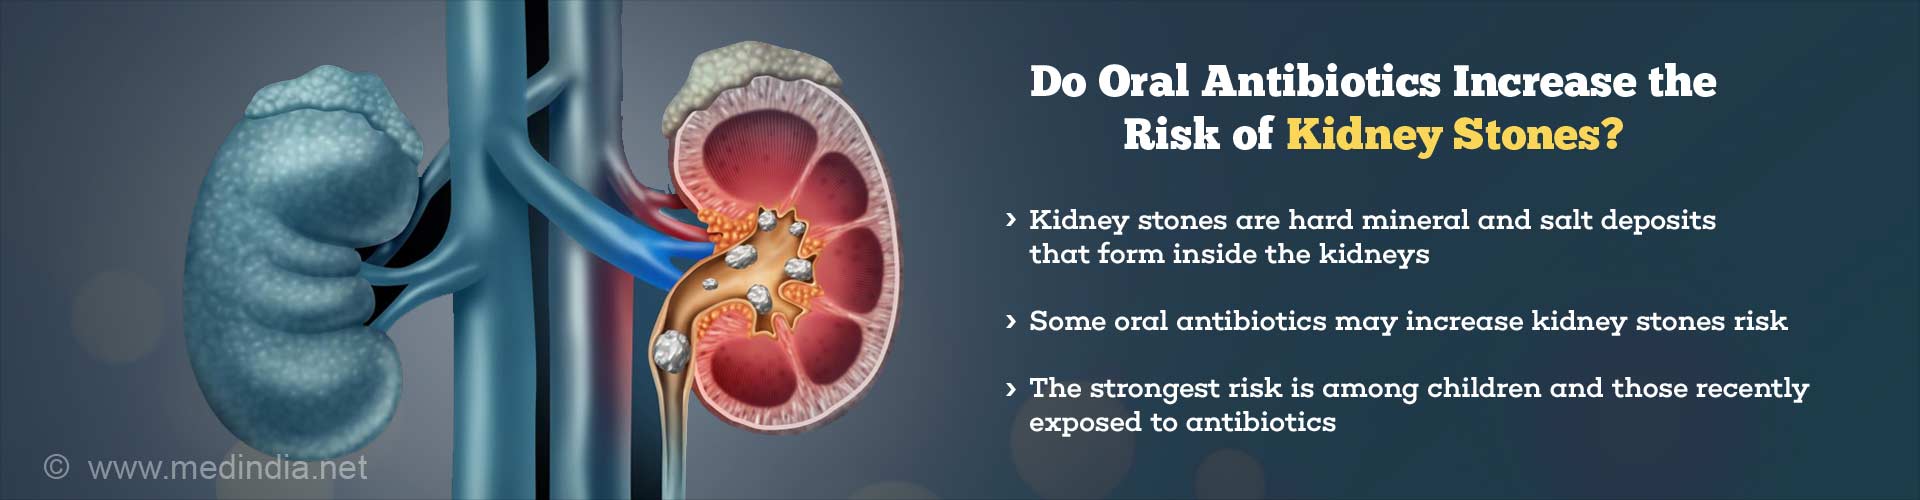 Do Oral Antibiotics Increase the Risk of Kidney Stones?
Kidney stones are hard mineral and salt deposits that form inside the kidneys
Some oral antibiotics may increase kidney stones risk
The strongest risk is among children and those recently exposed to antibiotics